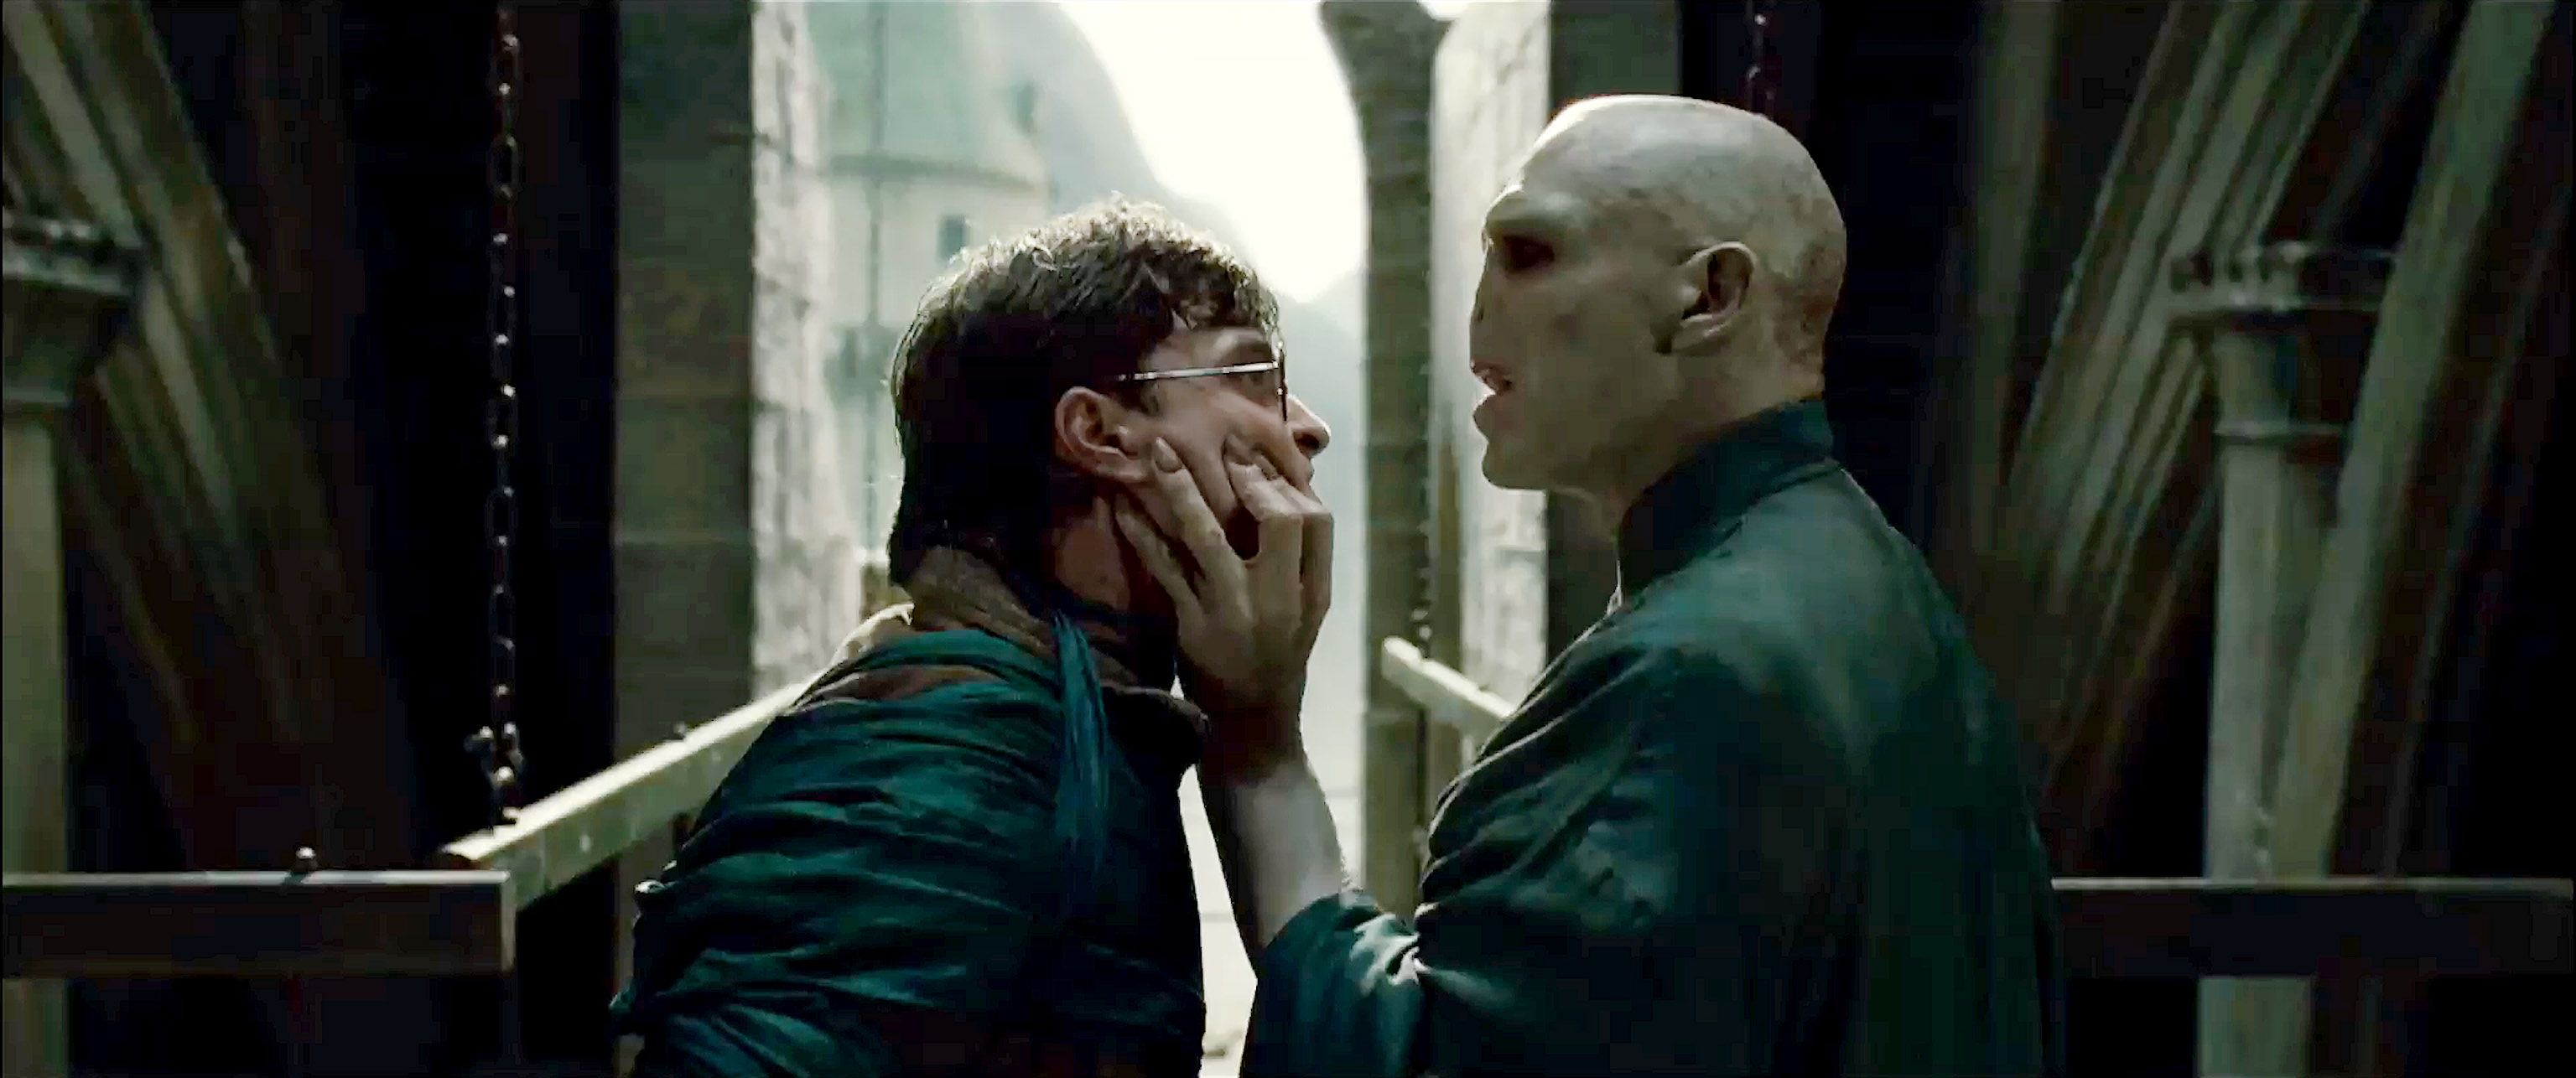 harry_potter_and_the_deathly_hallows_part_2_movie_image_daniel_radcliffe_ralph_fiennes_01.jpg